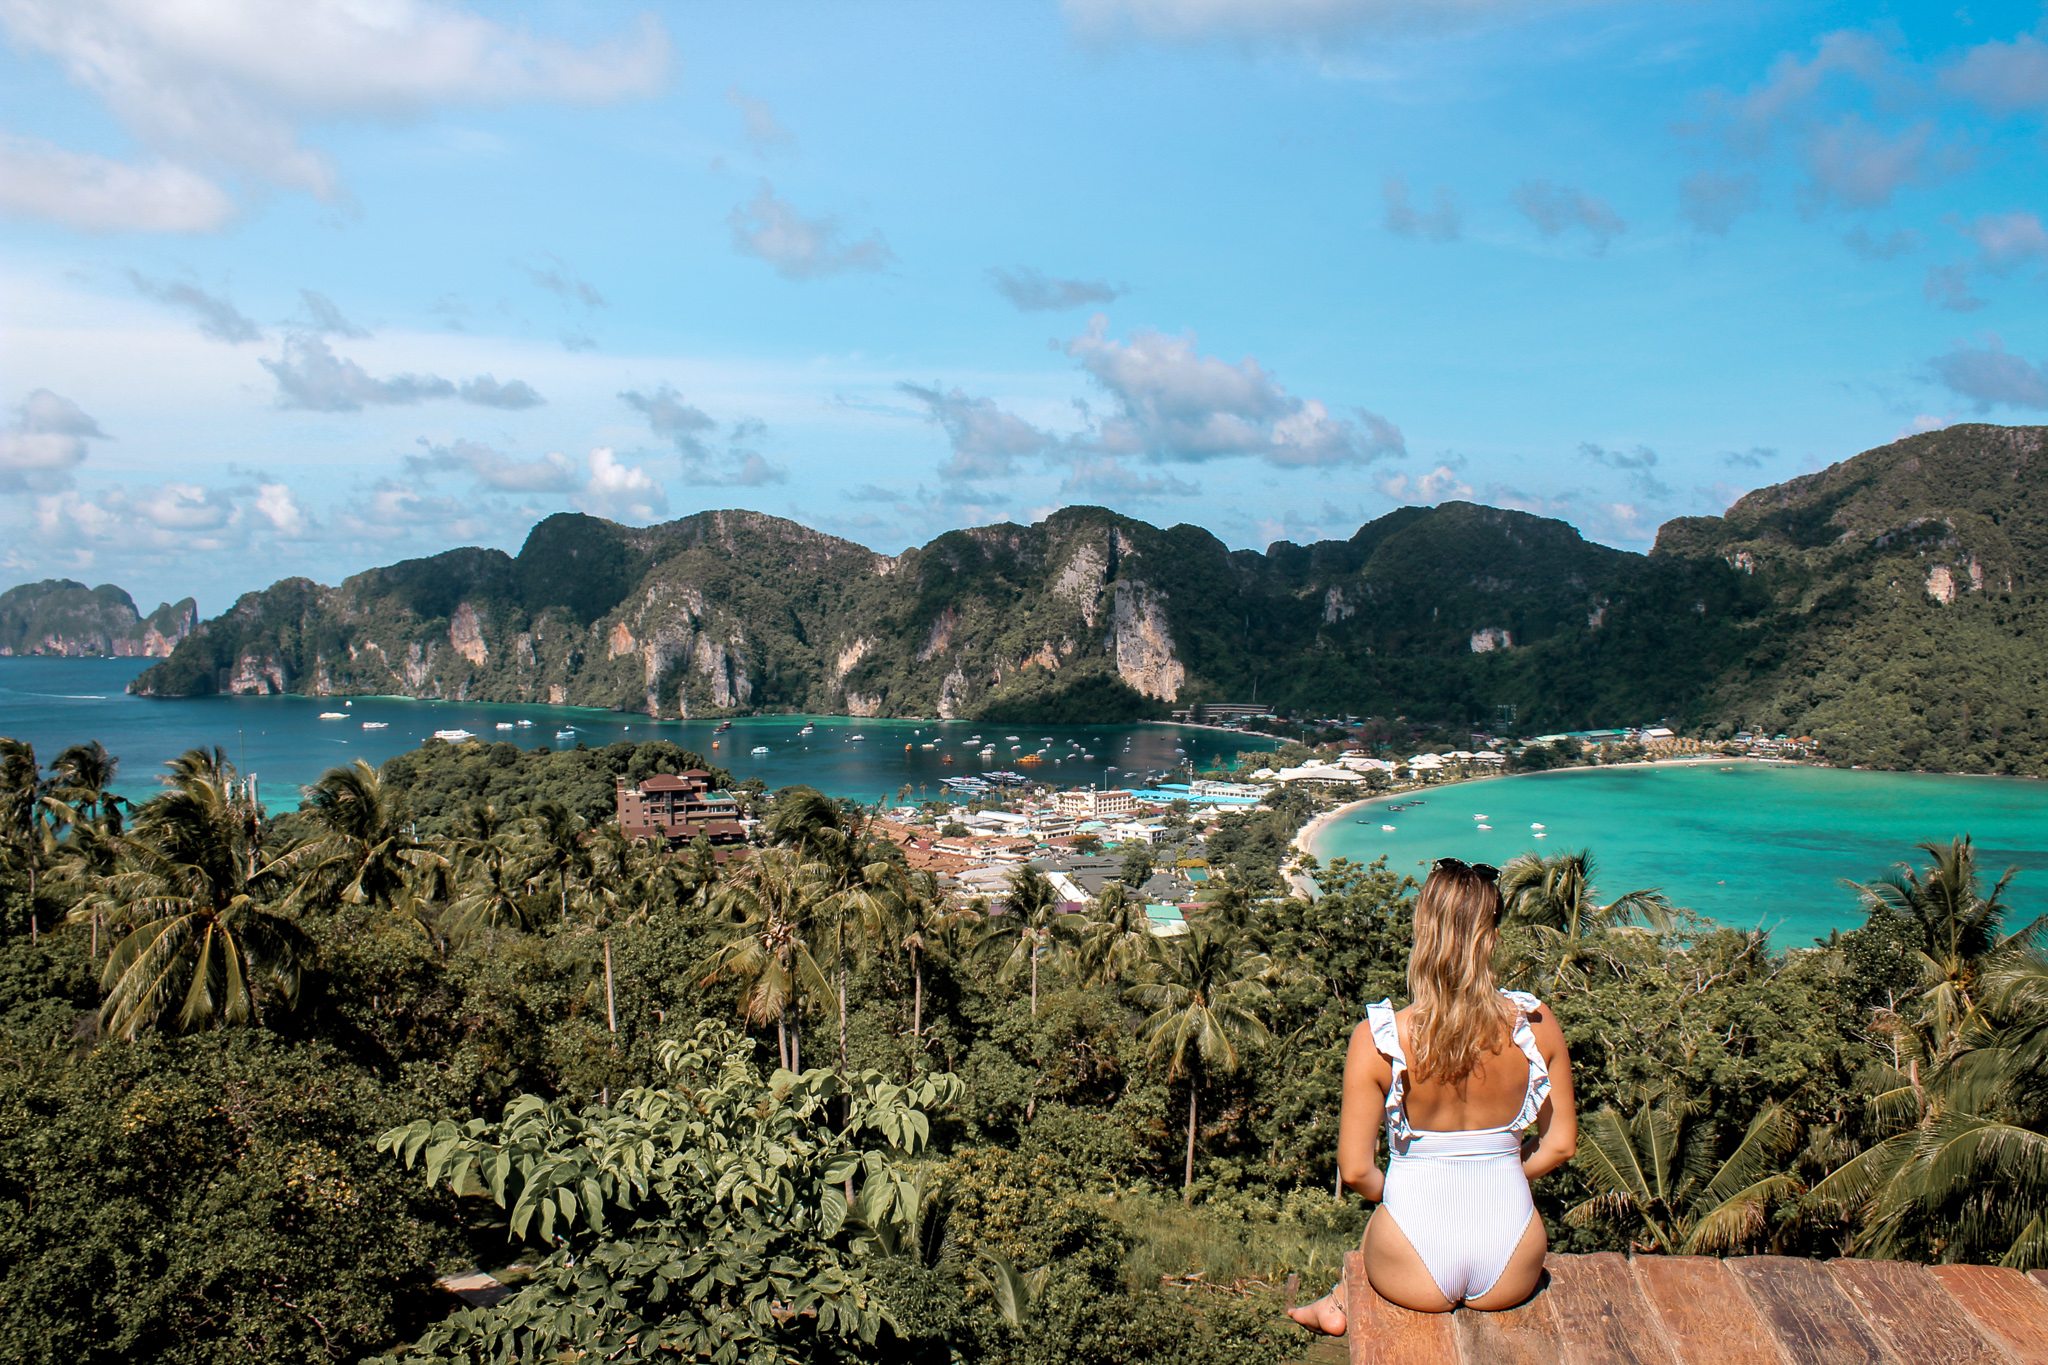 Viewpoint on Phi Phi Island, Thailand